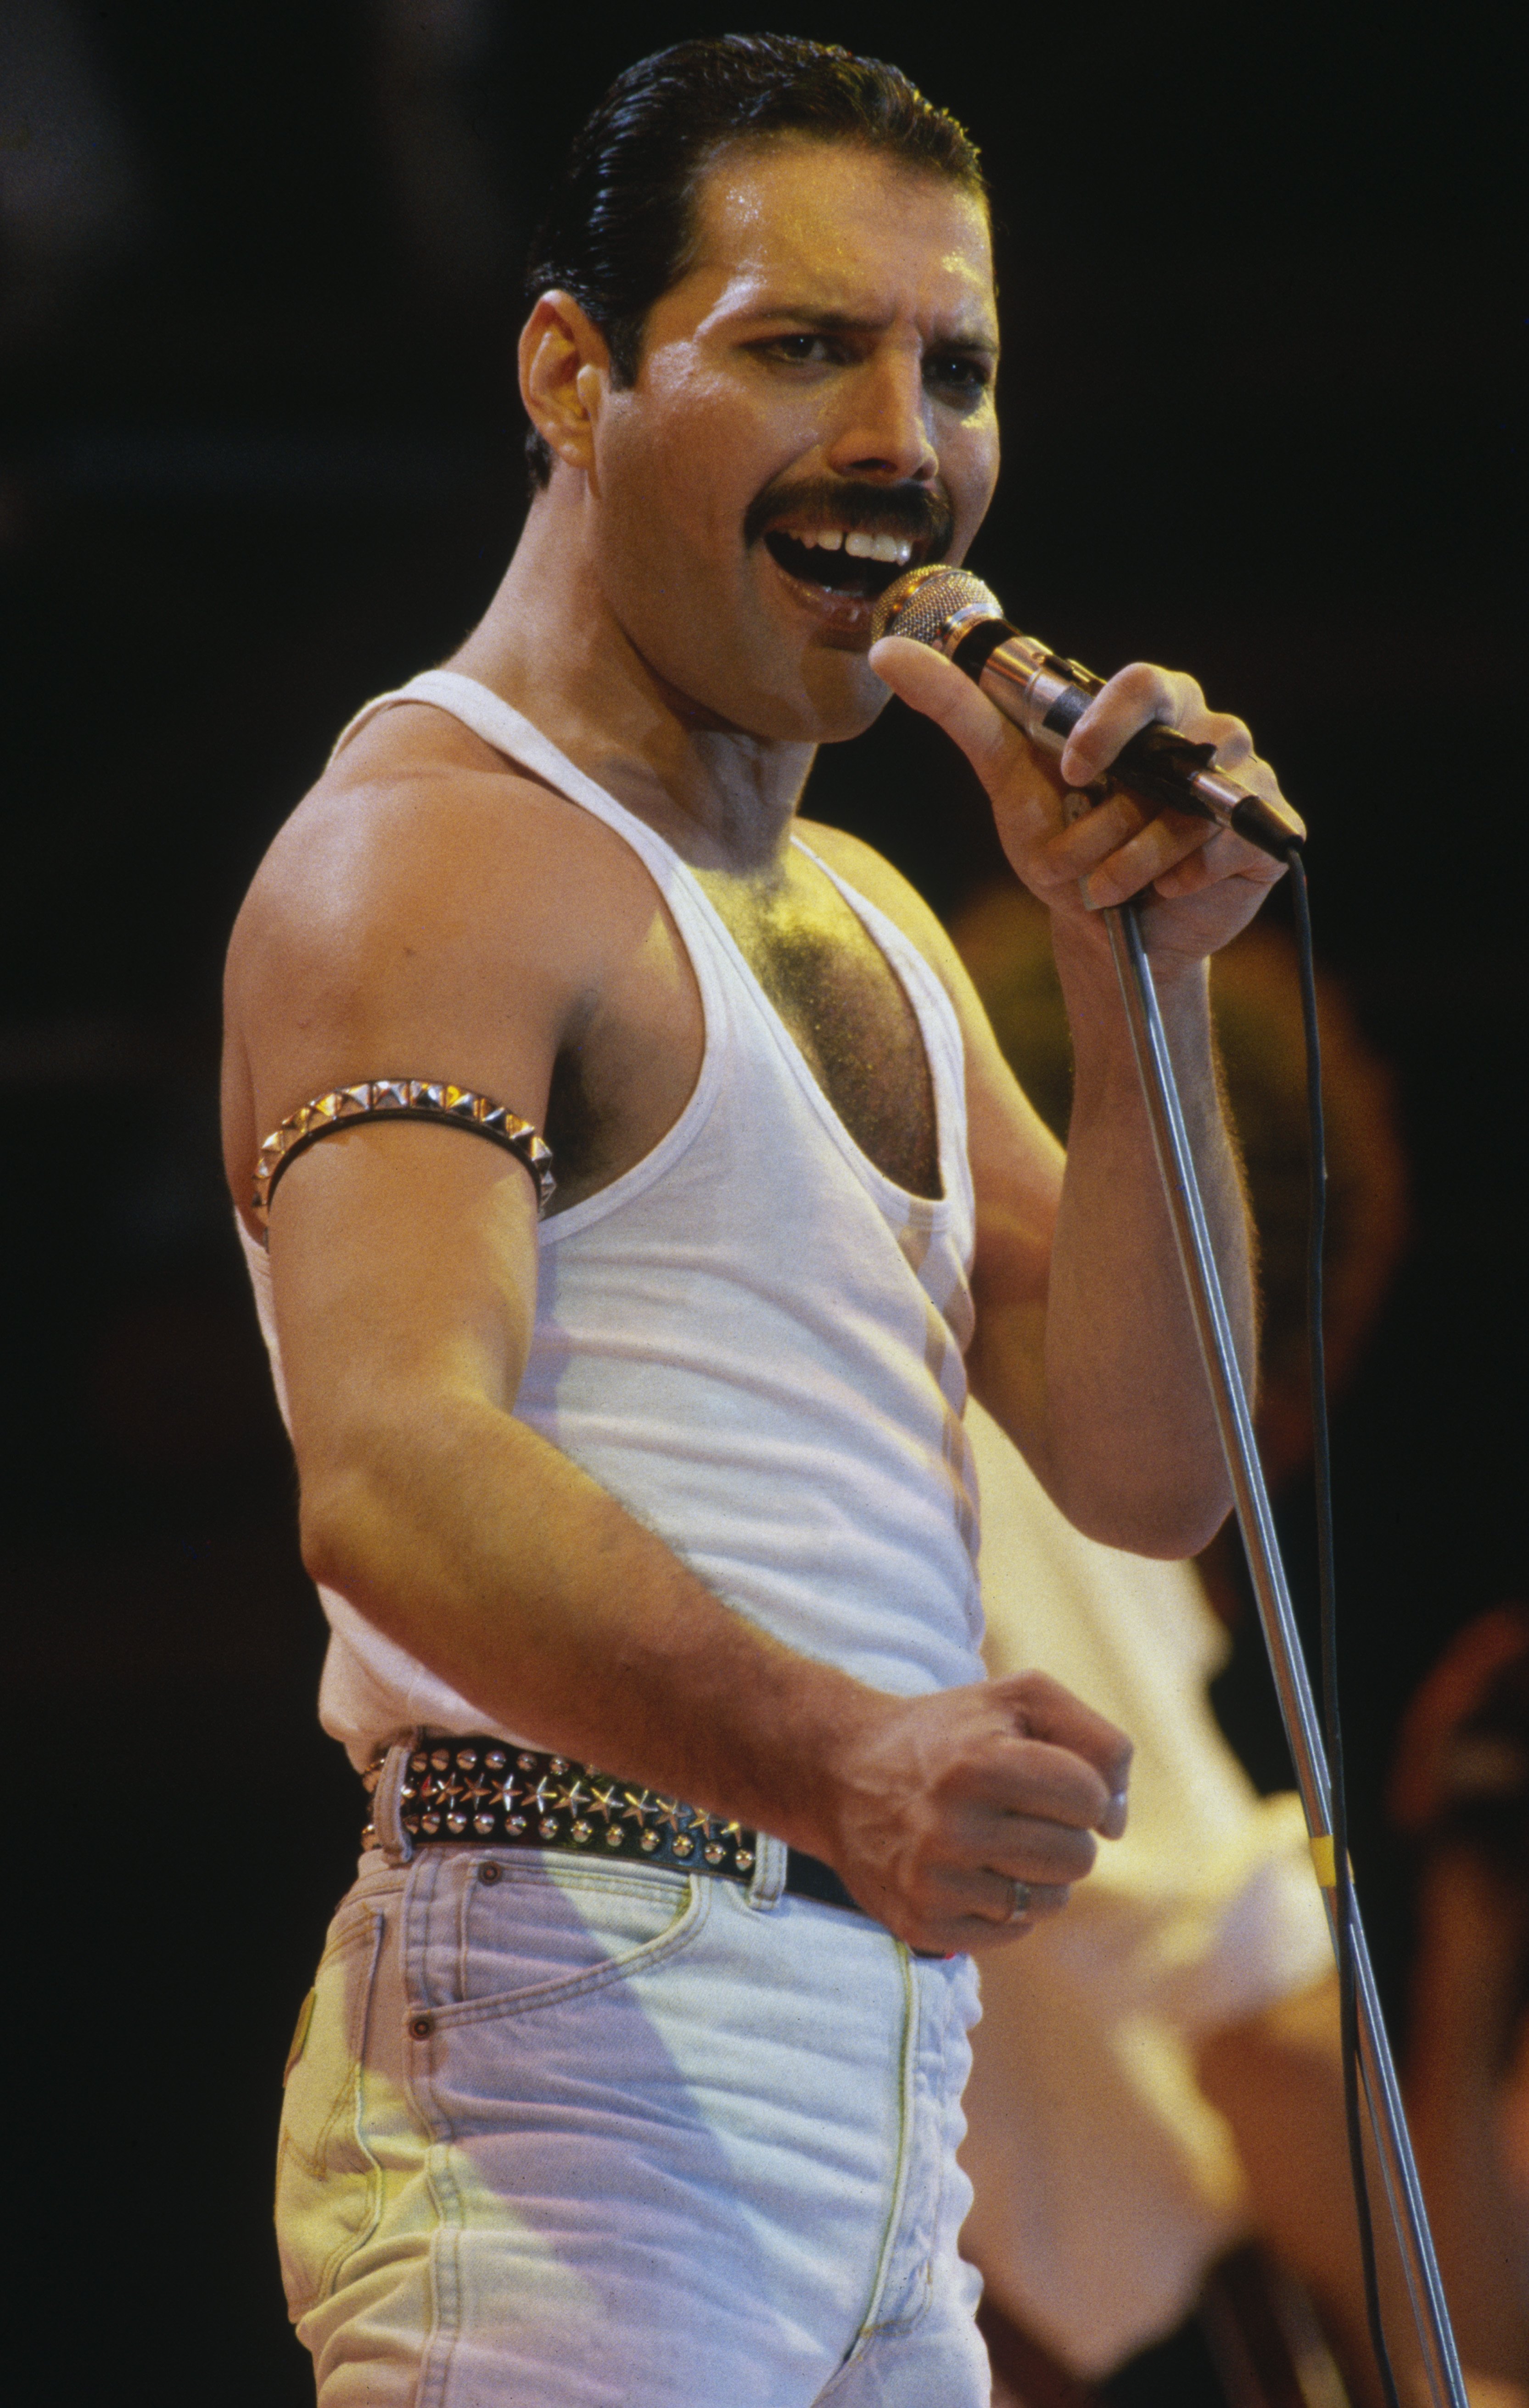 Freddie Mercury of Queen performs during Live Aid at Wembley Stadium on 13 July 1985. | Photo: GettyImages